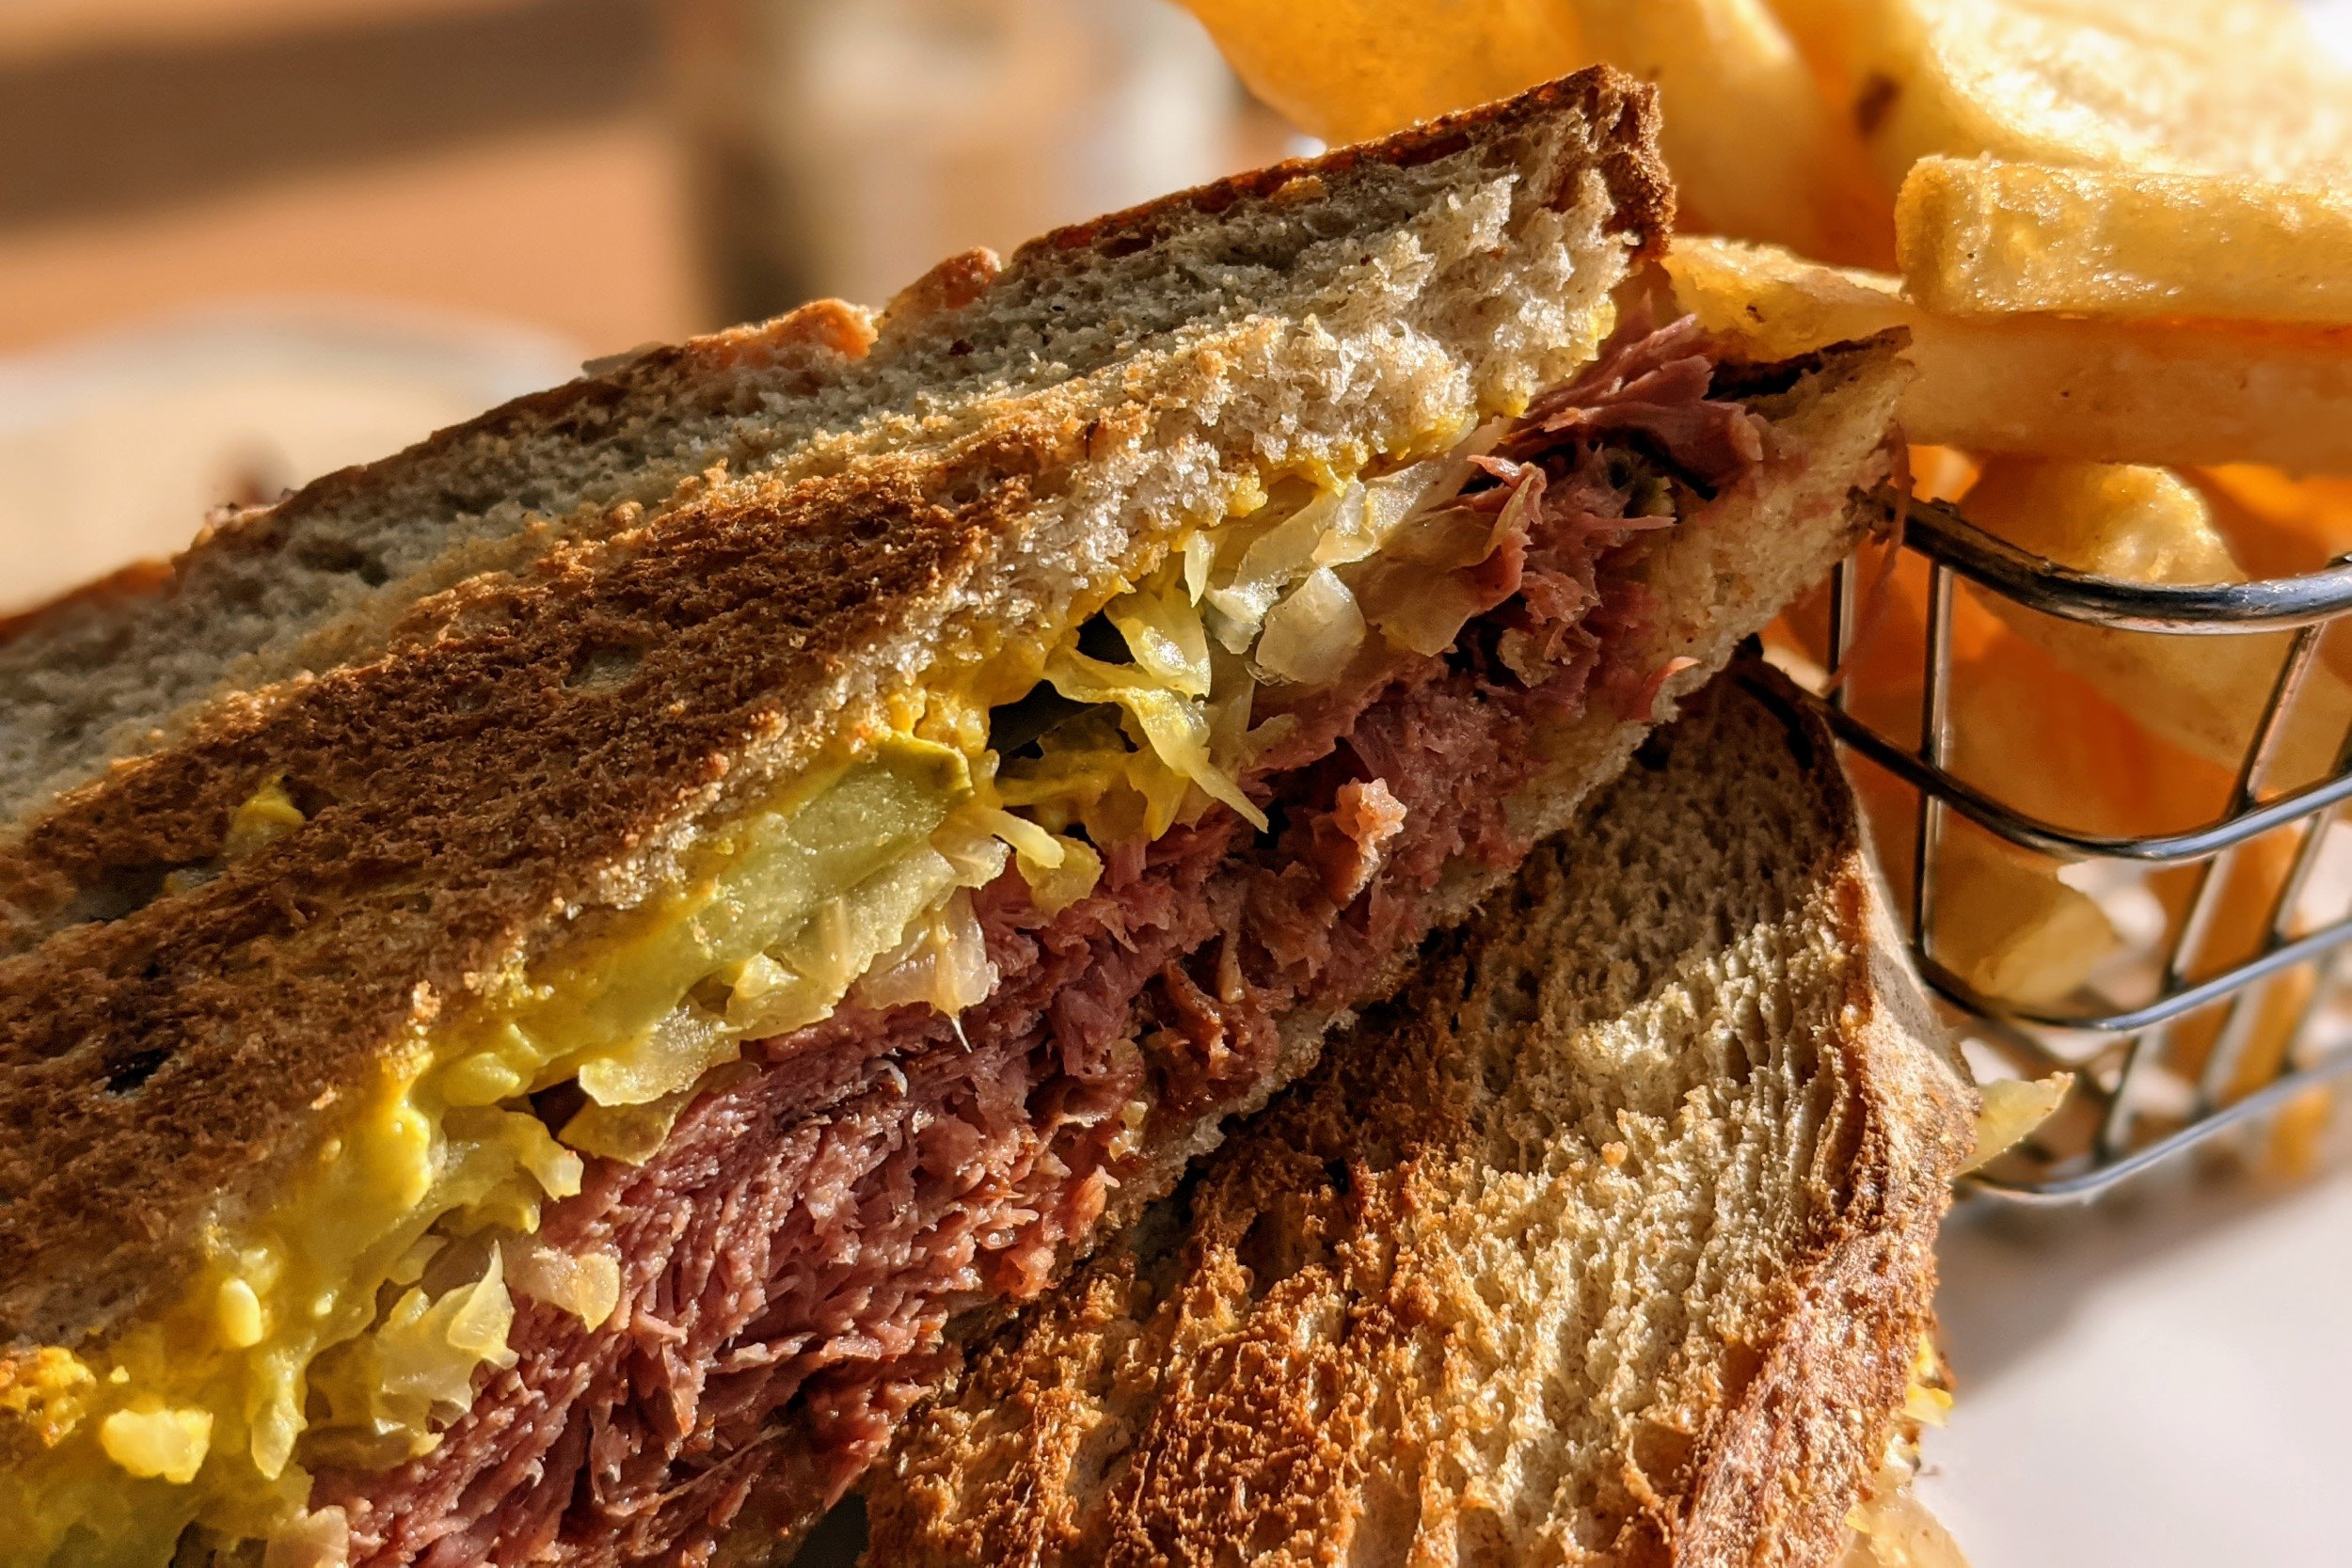 Closeup photo of sandwich with metal basket of chips in the background